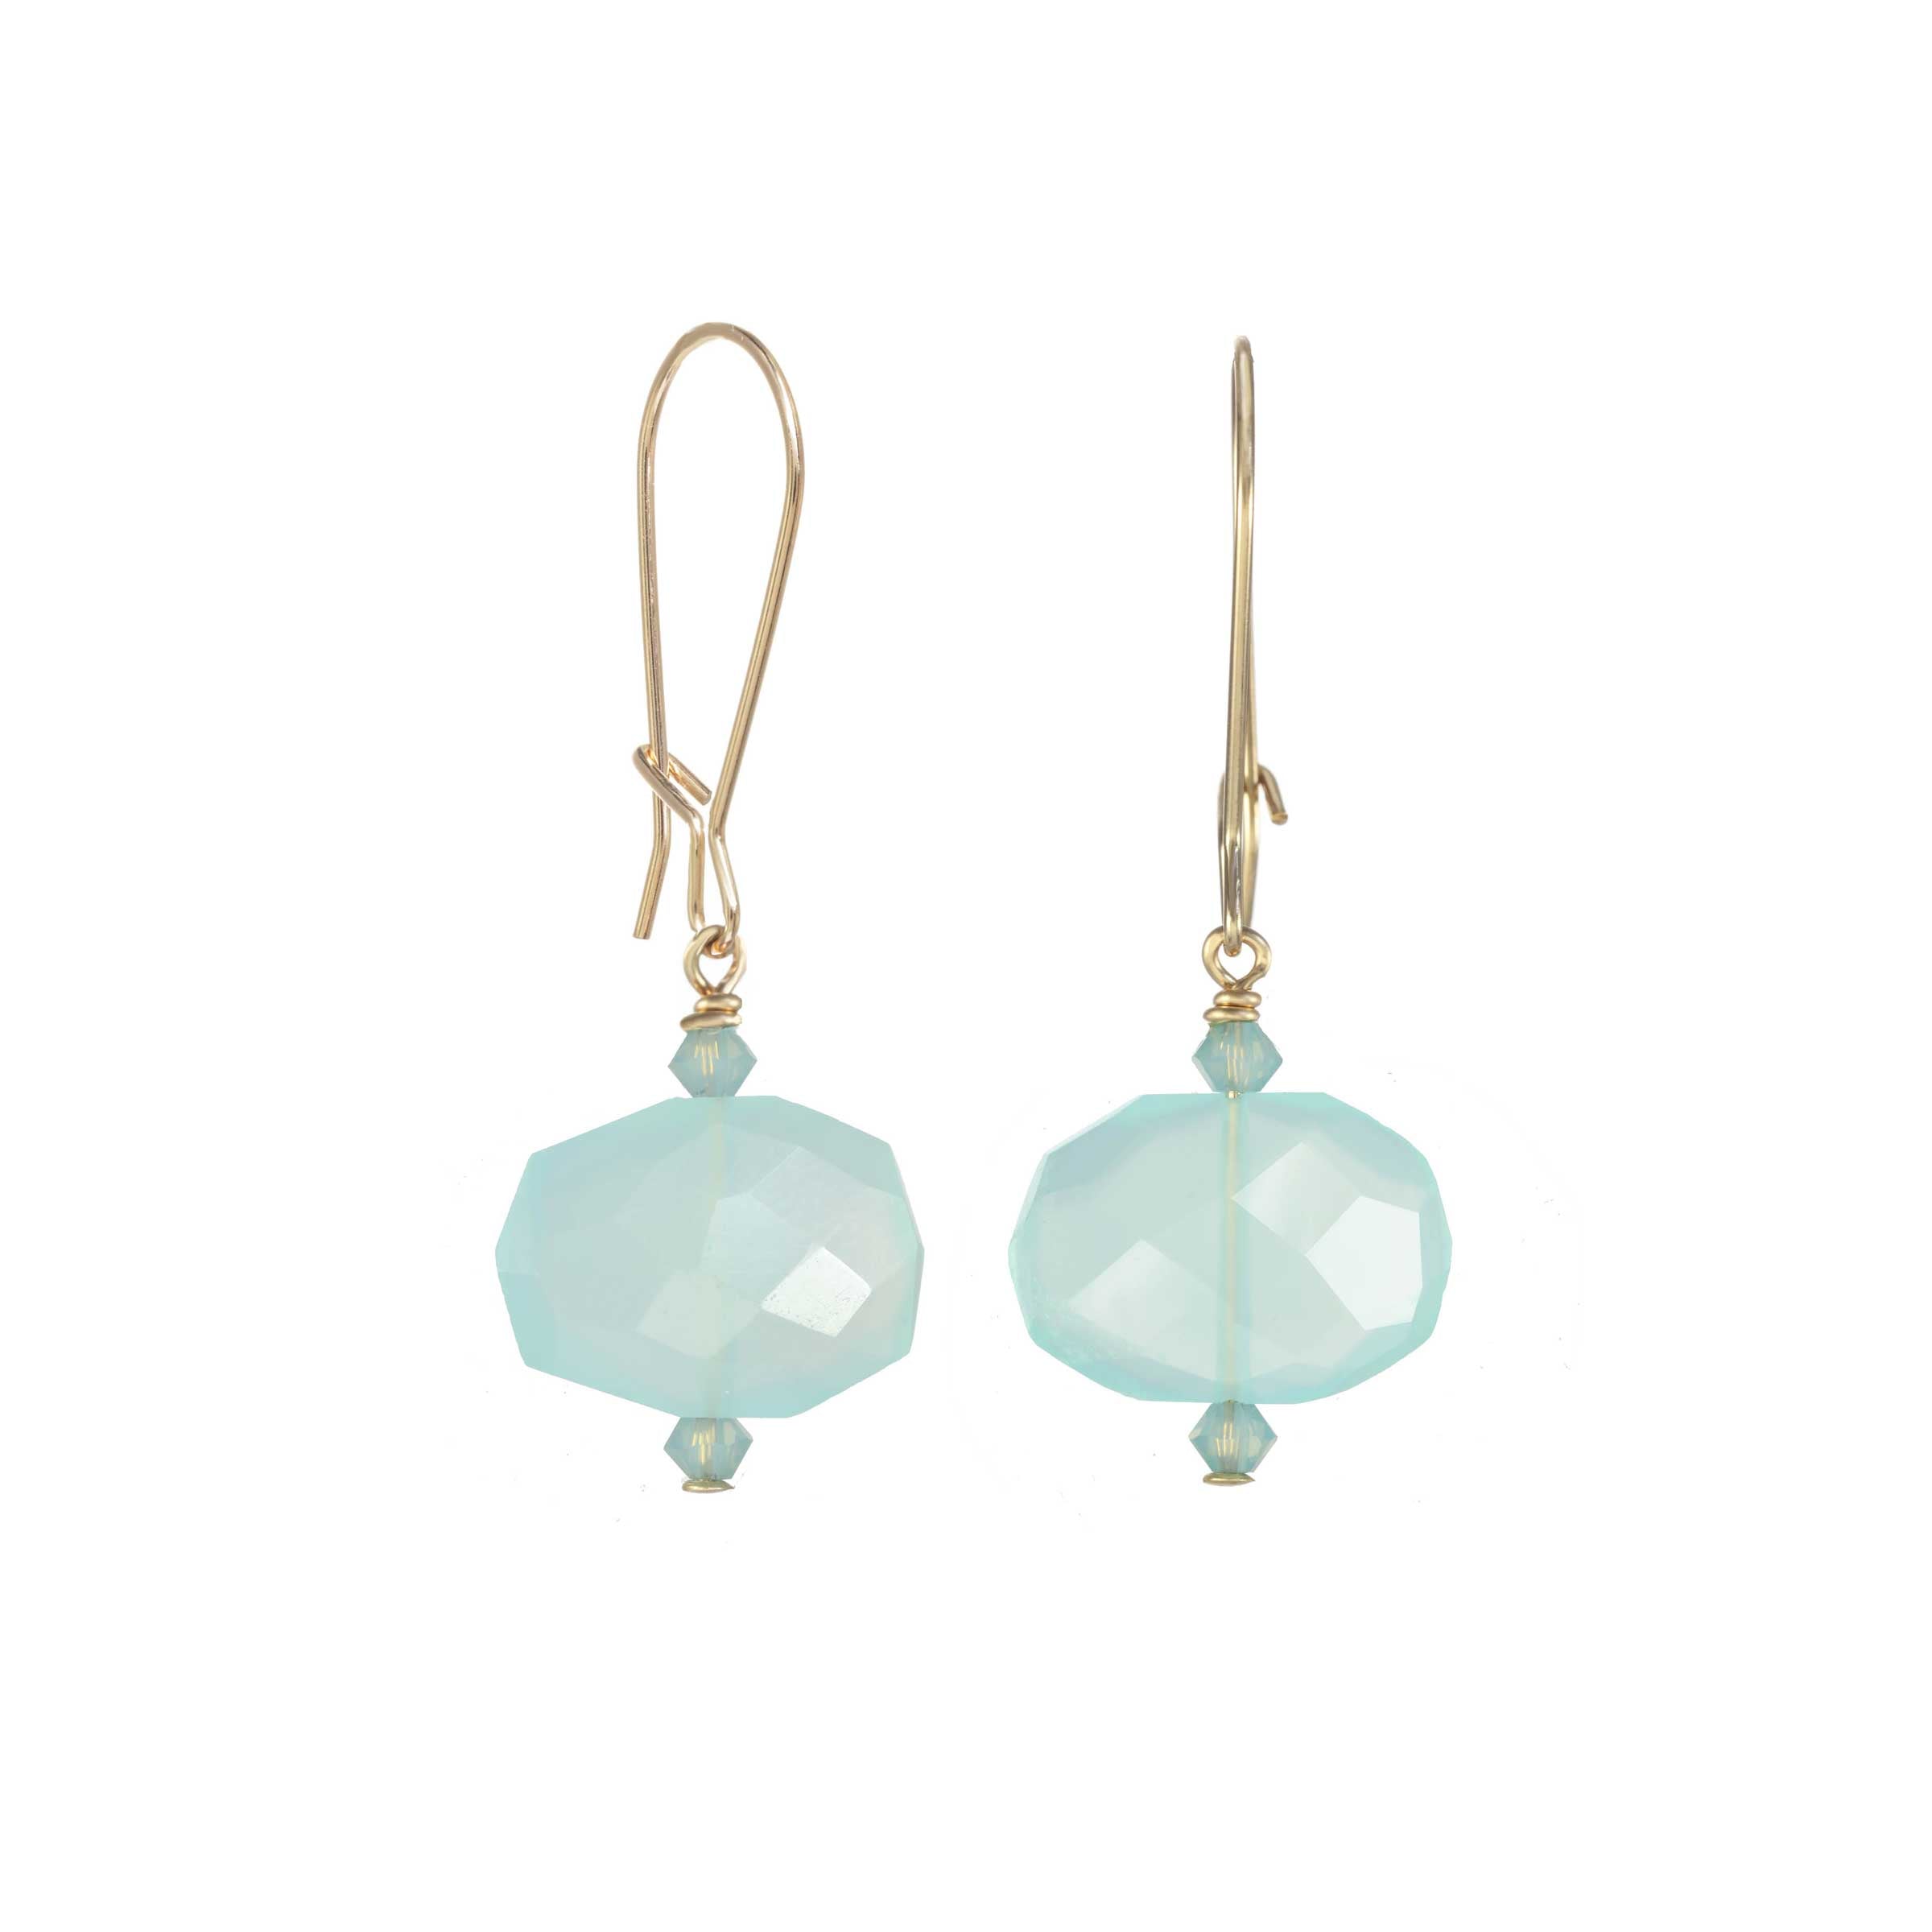 Faceted Peru Chalcedony Drop Earrings, Sterling Silver and Gold